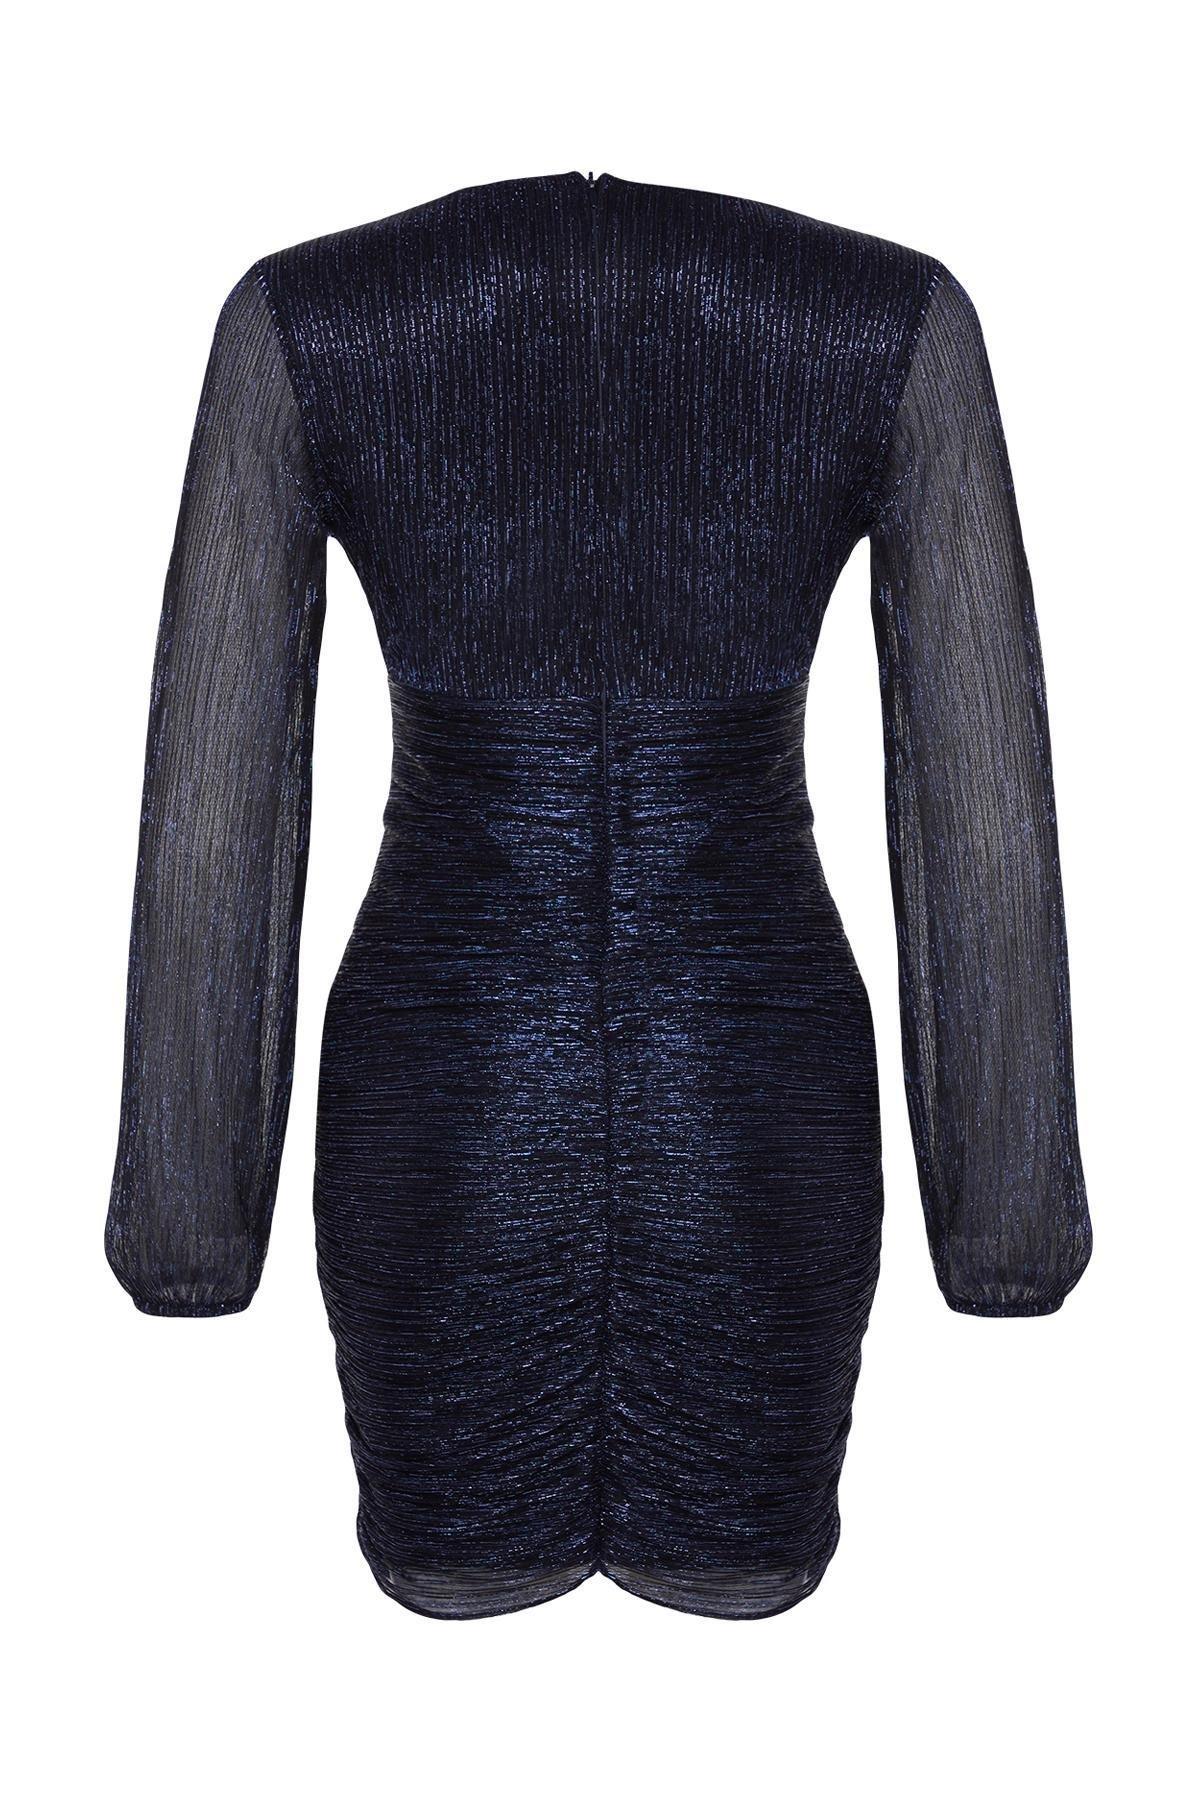 Trendyol - Navy Knitted Lined Occasionwear Dress